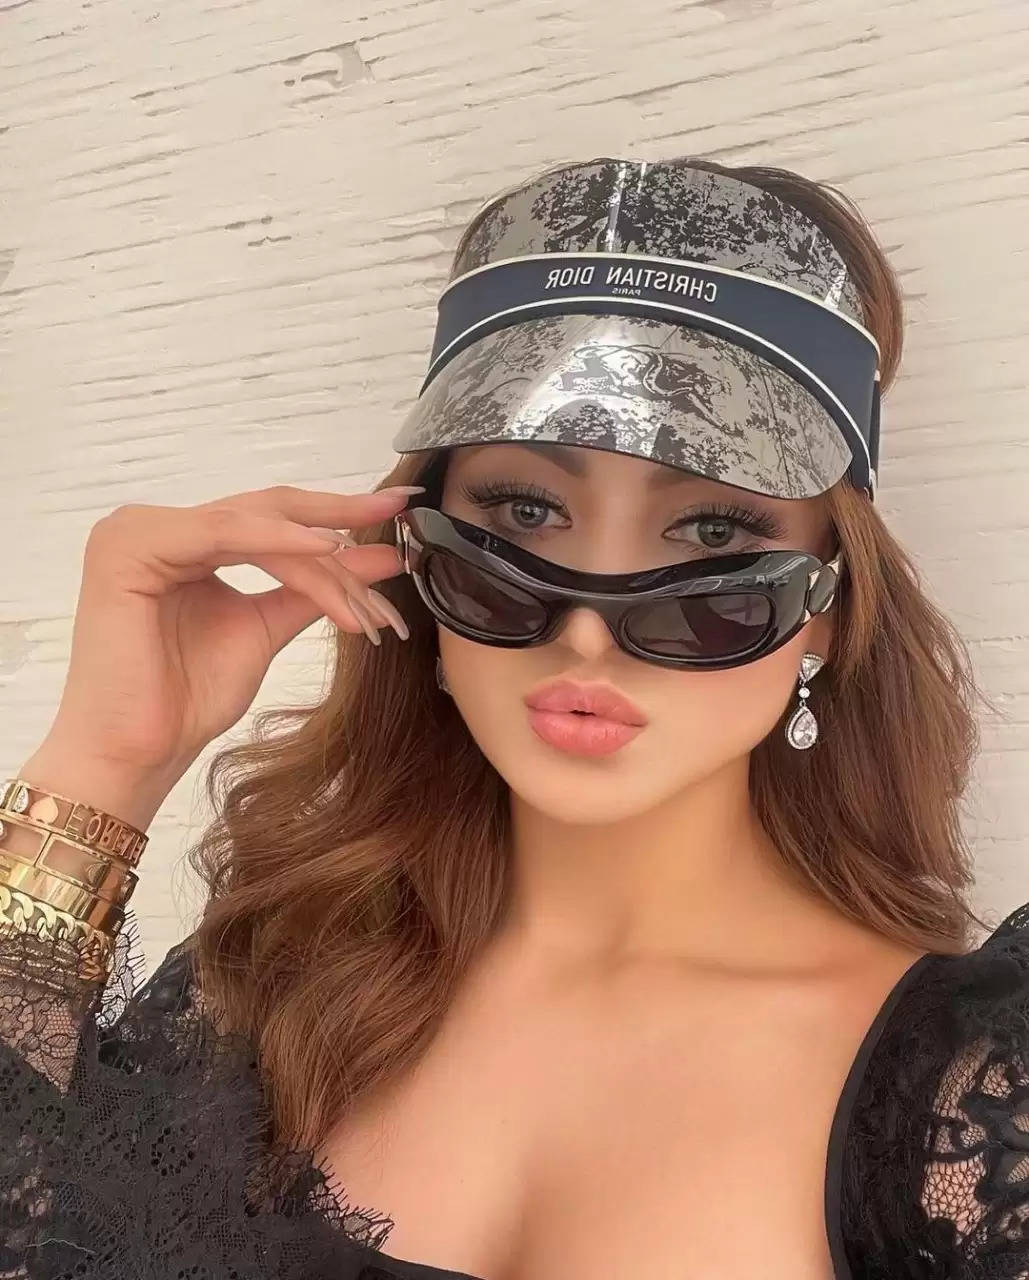 Urvashi Rautela Friday Mood Is About Dil E Naadan, Pouts In Christian Dior Accessories Worth 3 Lakh Rupees